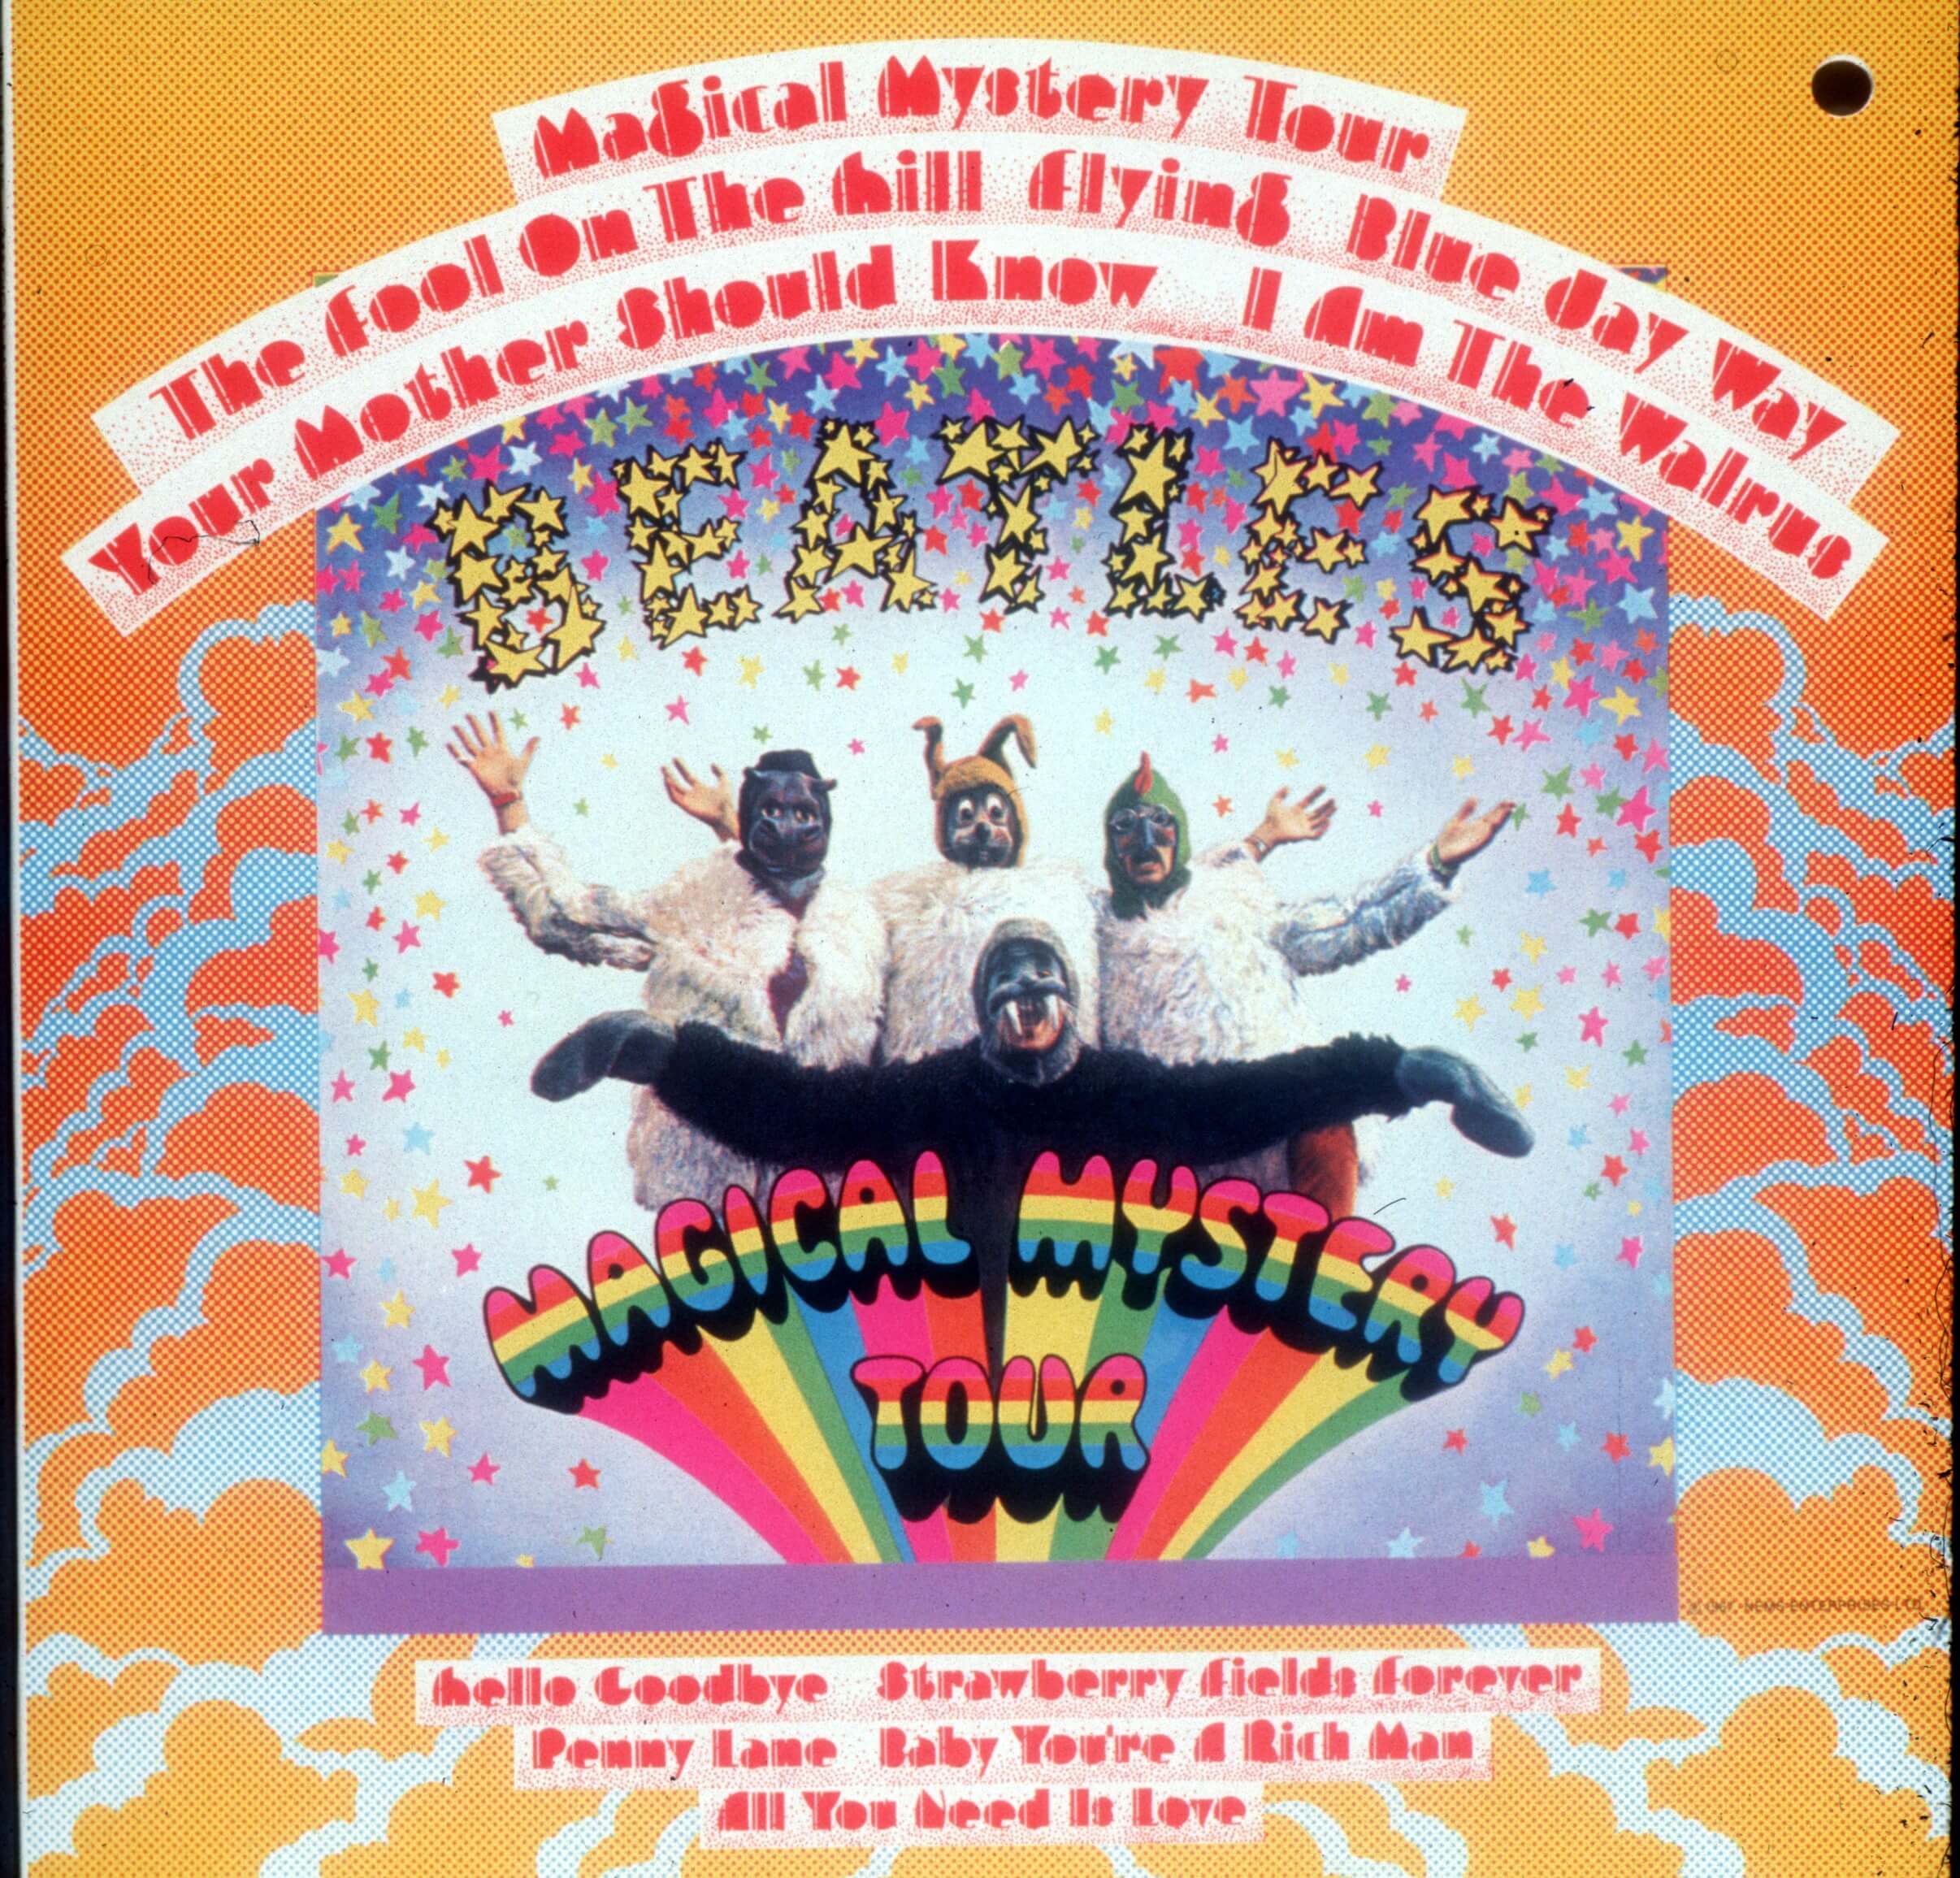 A vinyl of The Beatles' 'Magical Mystery Tour'